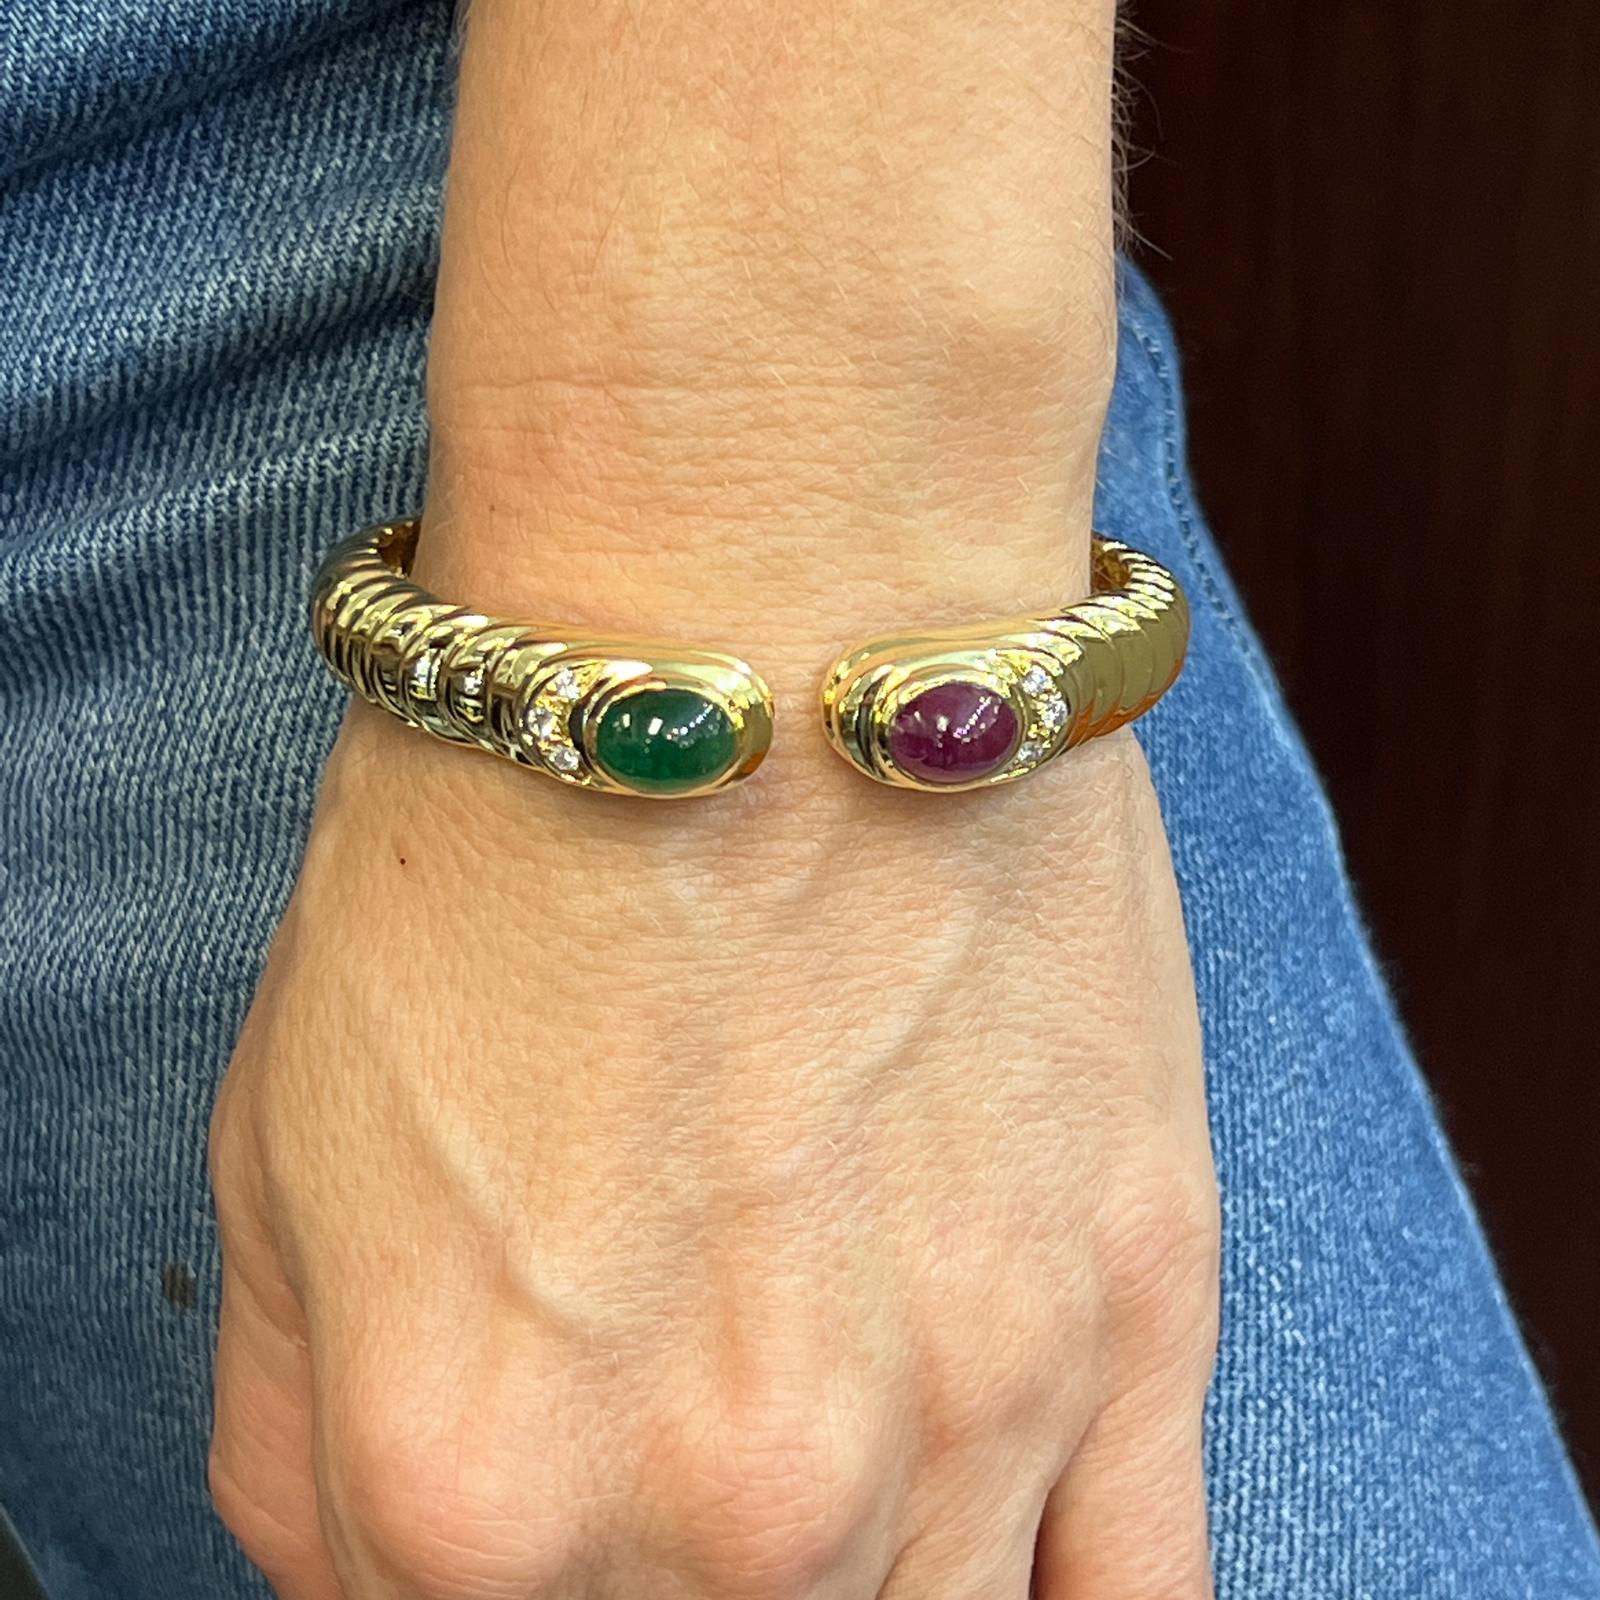 Beautiful cabochon ruby and emerald gemstone cuff bracelet fashioned in 18 karat yellow gold. The 1960's vintage cuff features natural cabochon ruby and emerald gemstones weighing approximately 6.0 carat total weight and 6 round brilliant cut